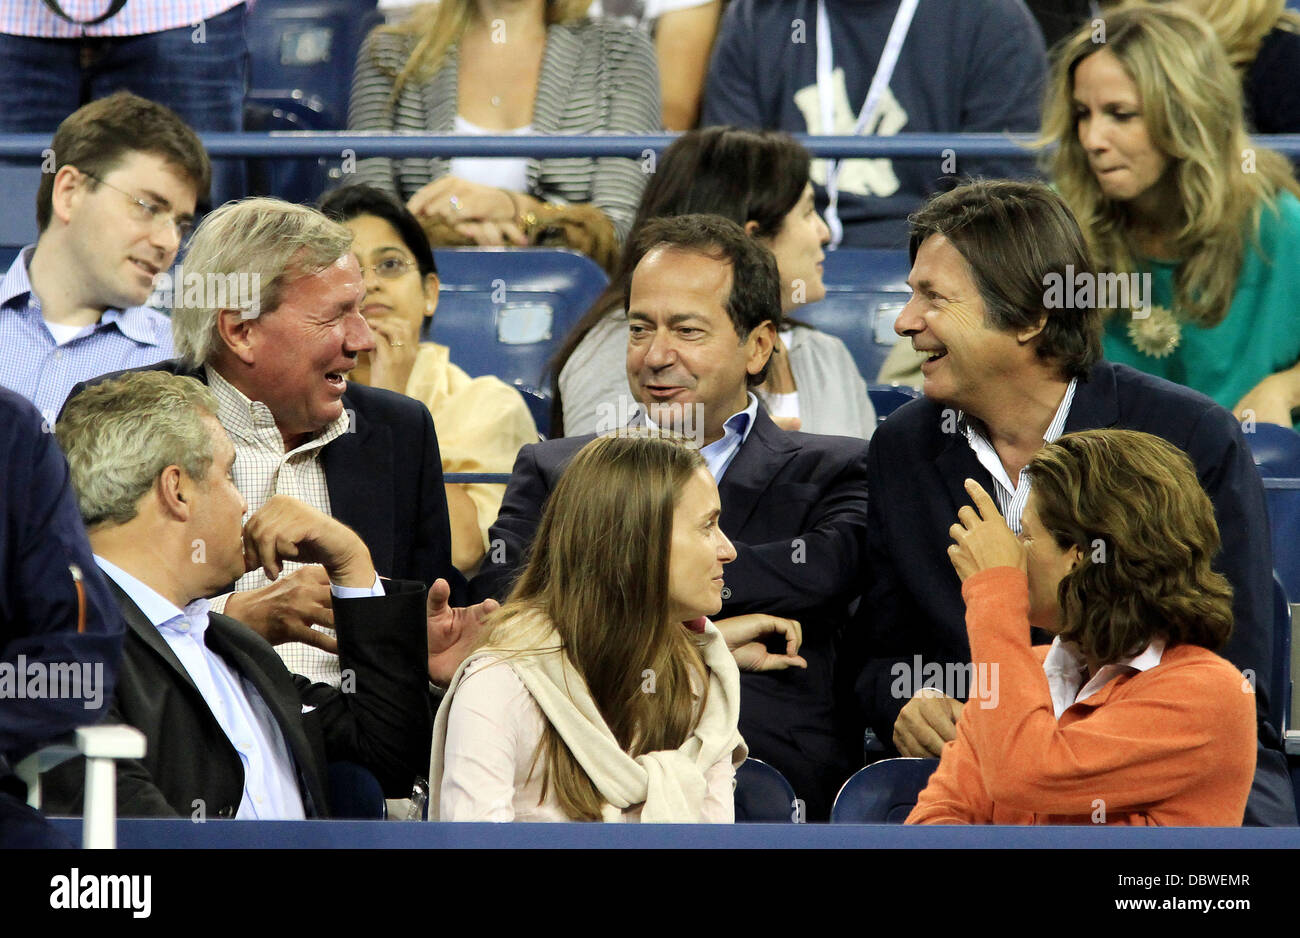 Hedge-Fund Billionaire John Paulson, having a laugh with friends during the  match between Novak Djokovic, SRB, and Carlos Berlocq, ARG, Thursday  September 1, 2011, on Day 4, of the US Open Tennis